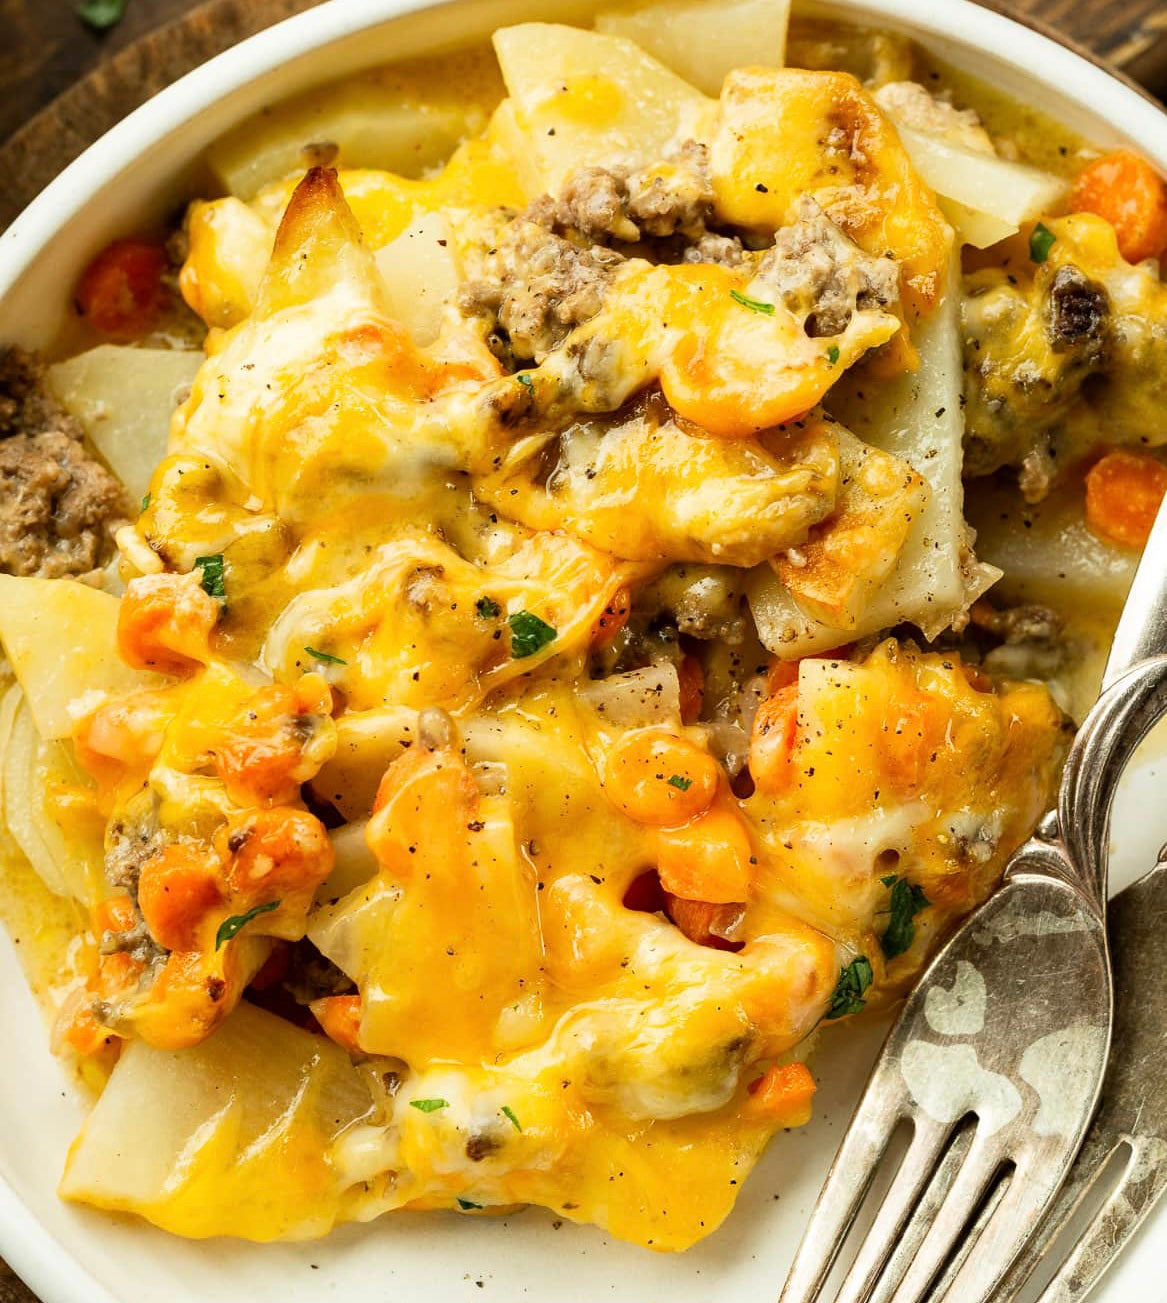 Cheesy Scalloped Potato and Ground Beef Bake with side of Greens